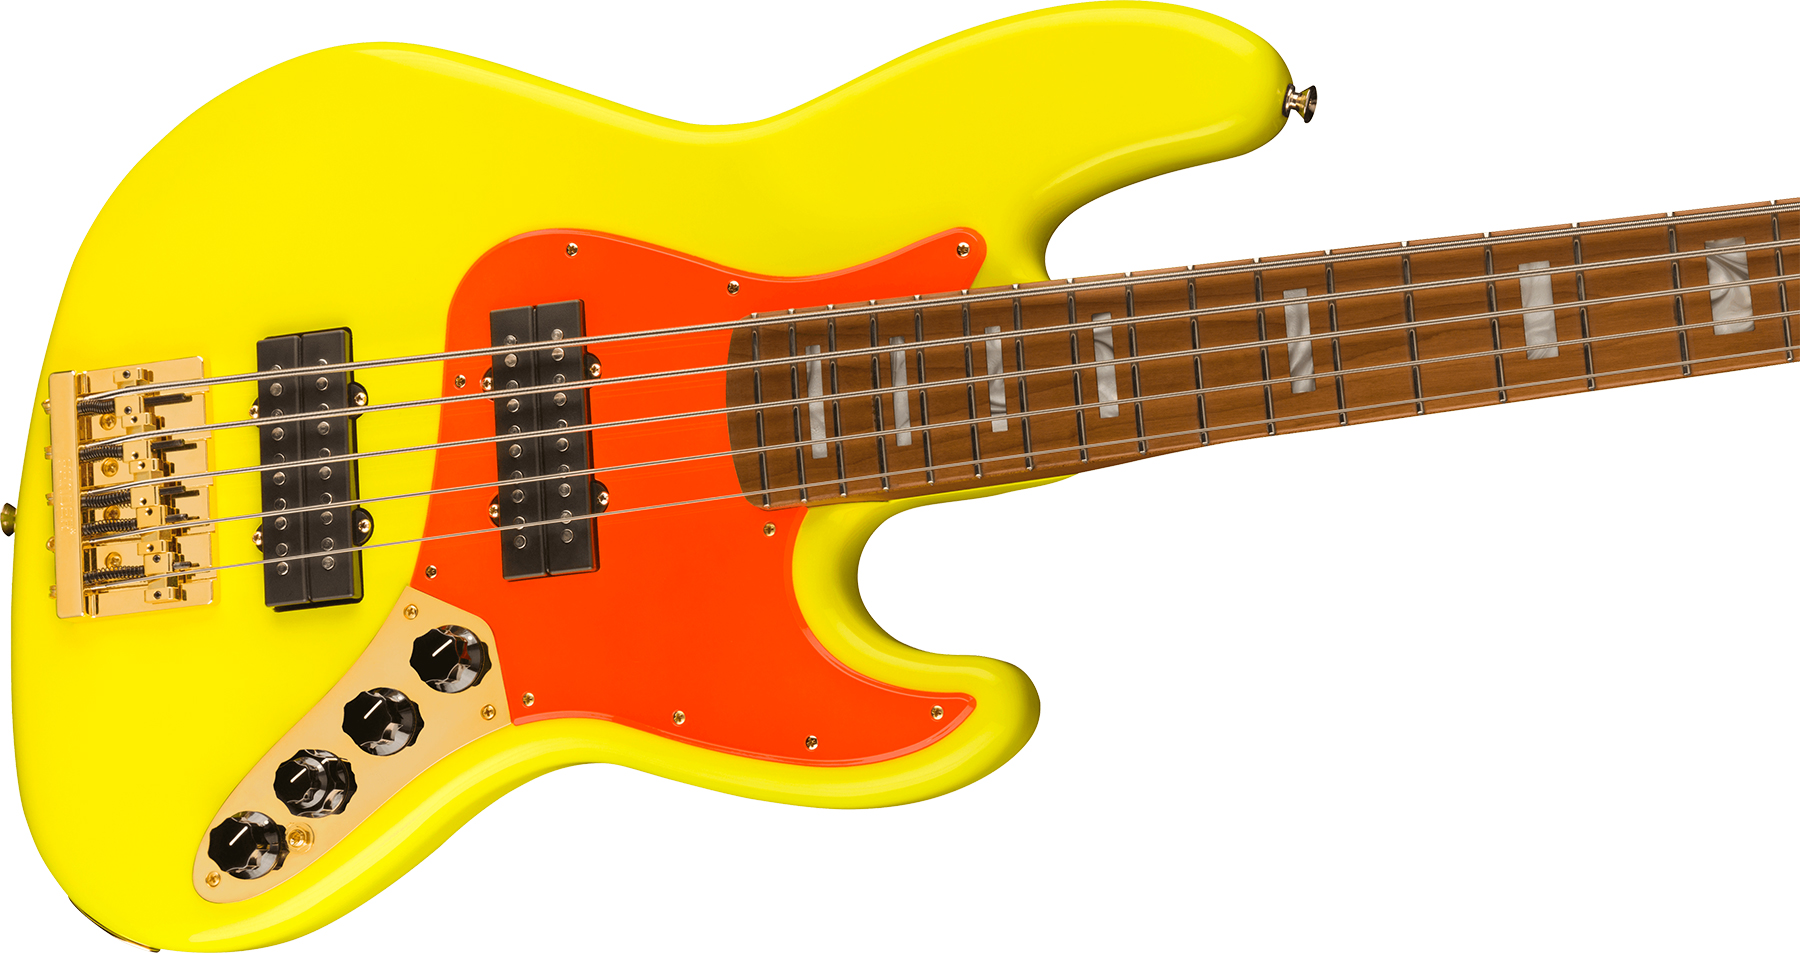 Fender Jazz Bass Mononeon V Mex Signature 5c Active Mn - Neon Yellow - Solid body electric bass - Variation 2